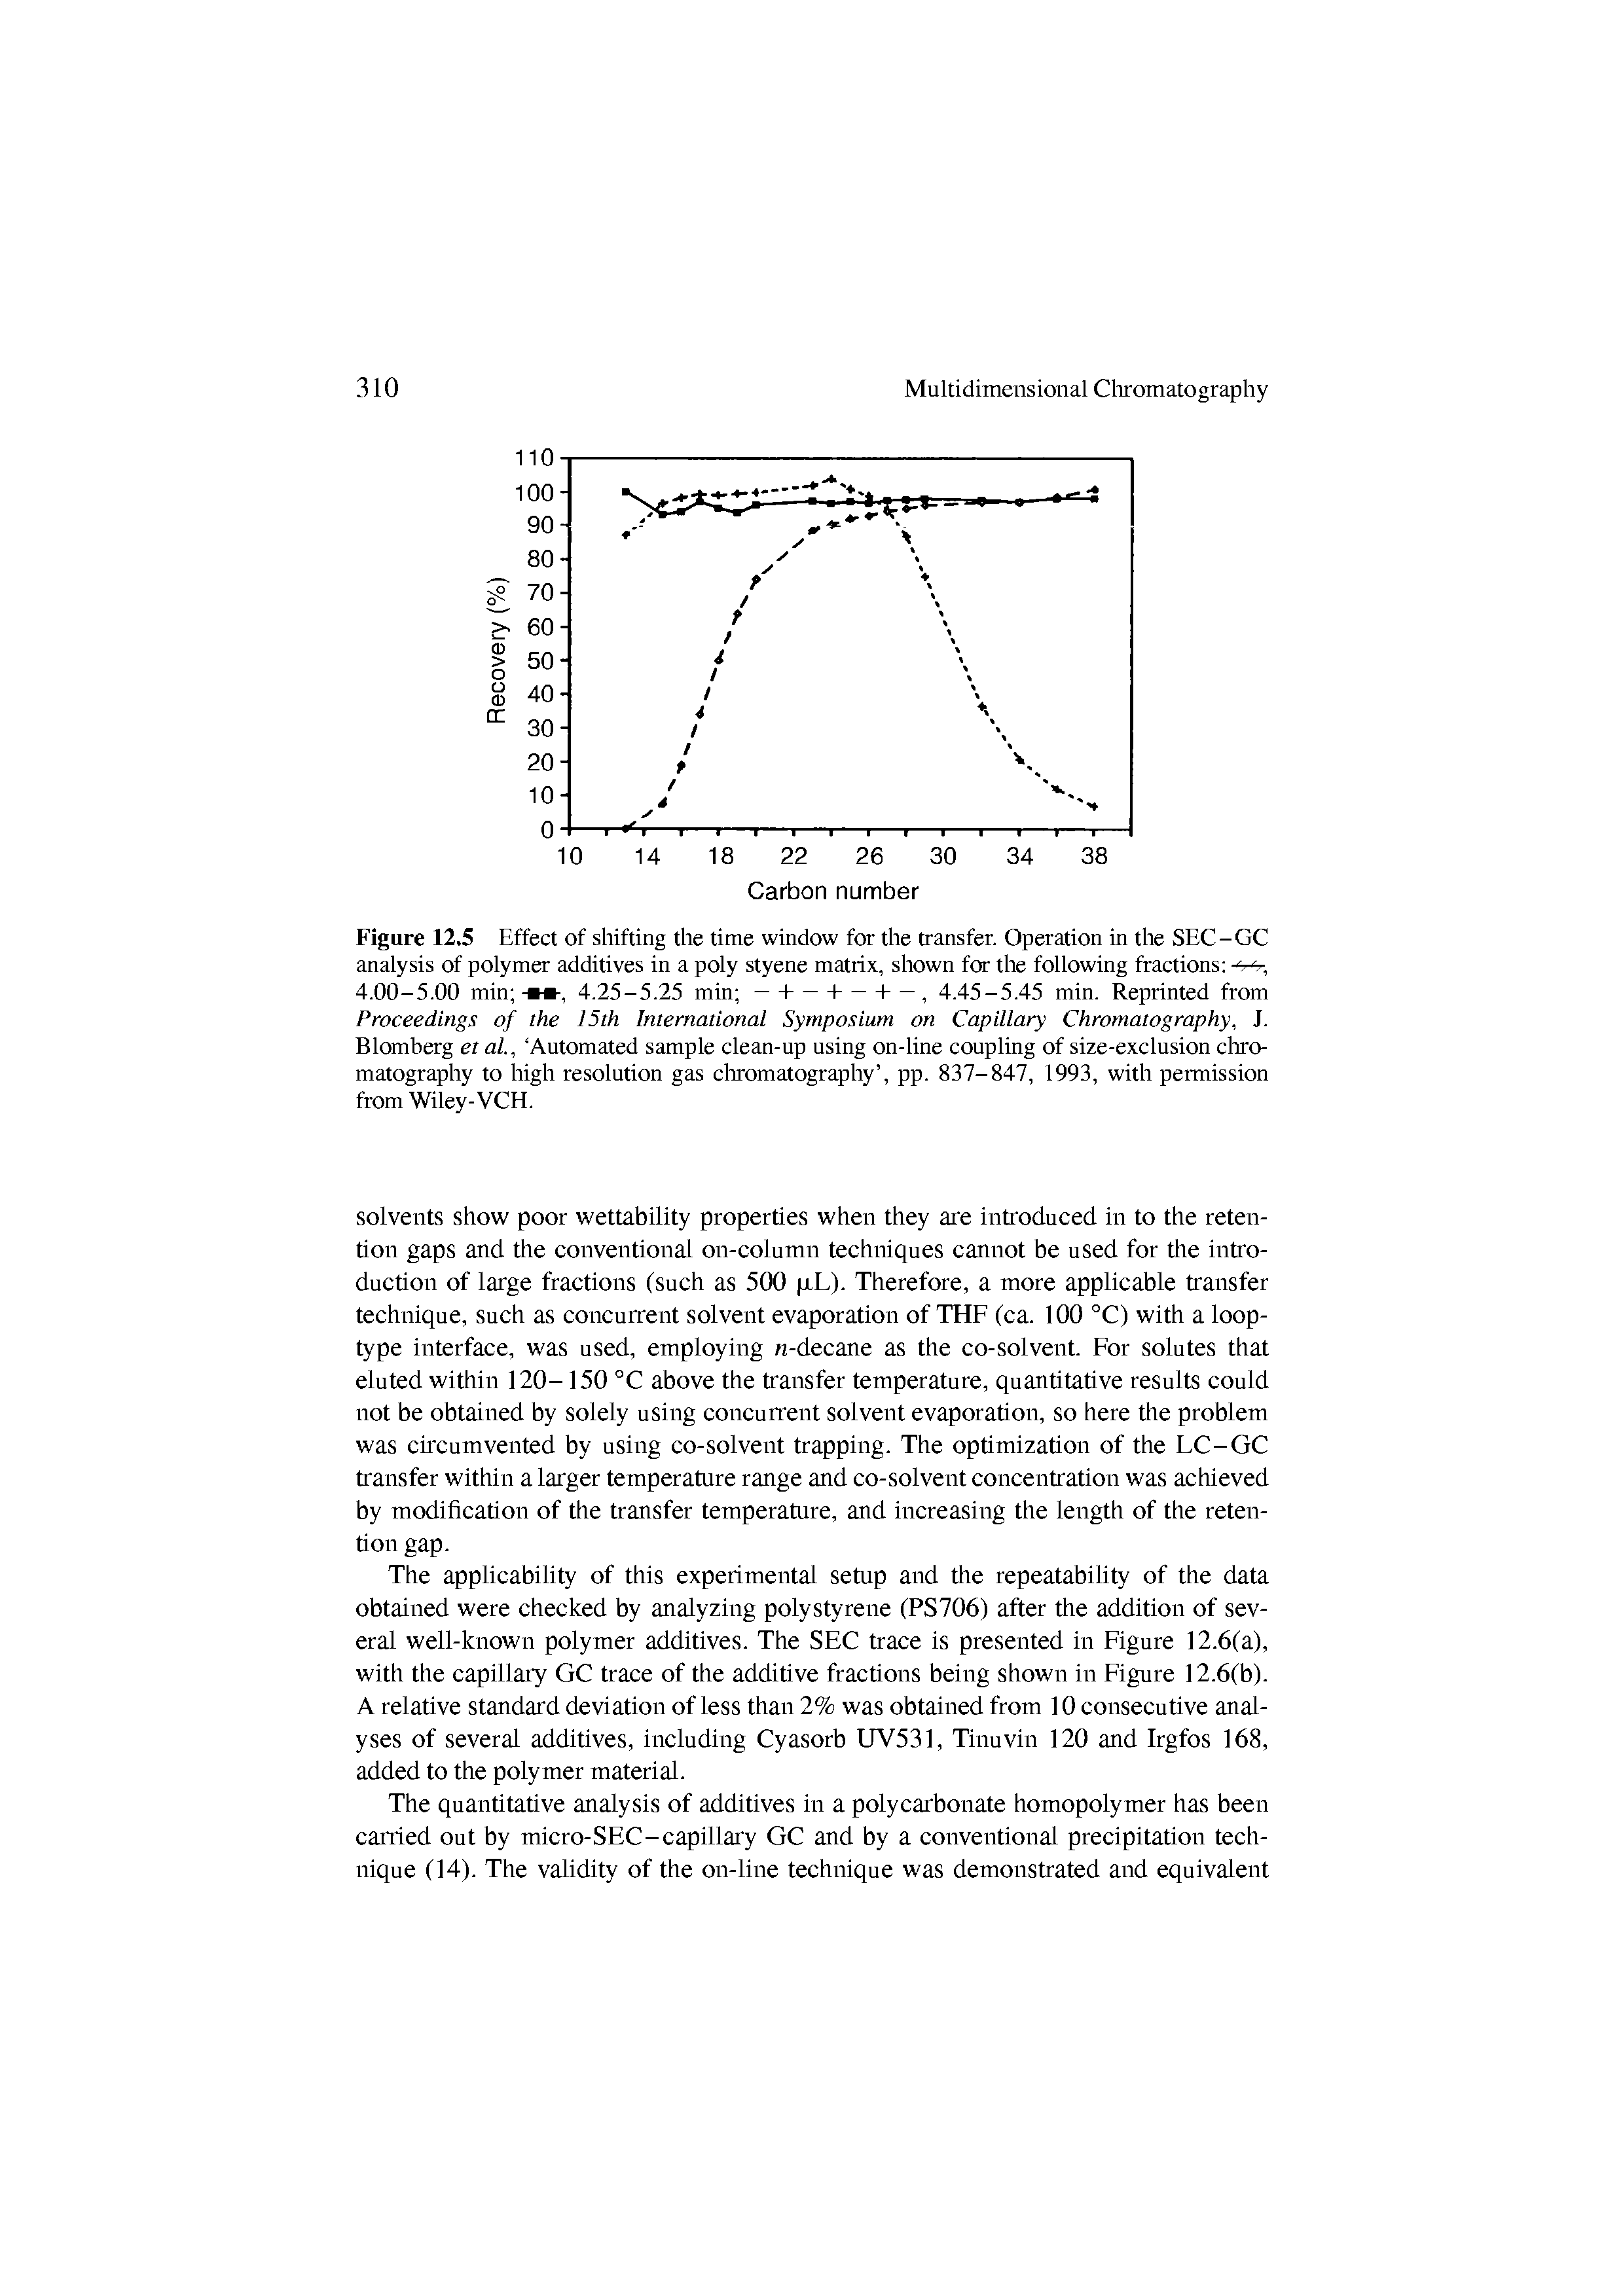 Figure 12.5 Effect of shifting the time window for the ti ansfer. Operation in the SEC-GC analysis of polymer additives in a poly styene matrix, shown foi the following fractions ...